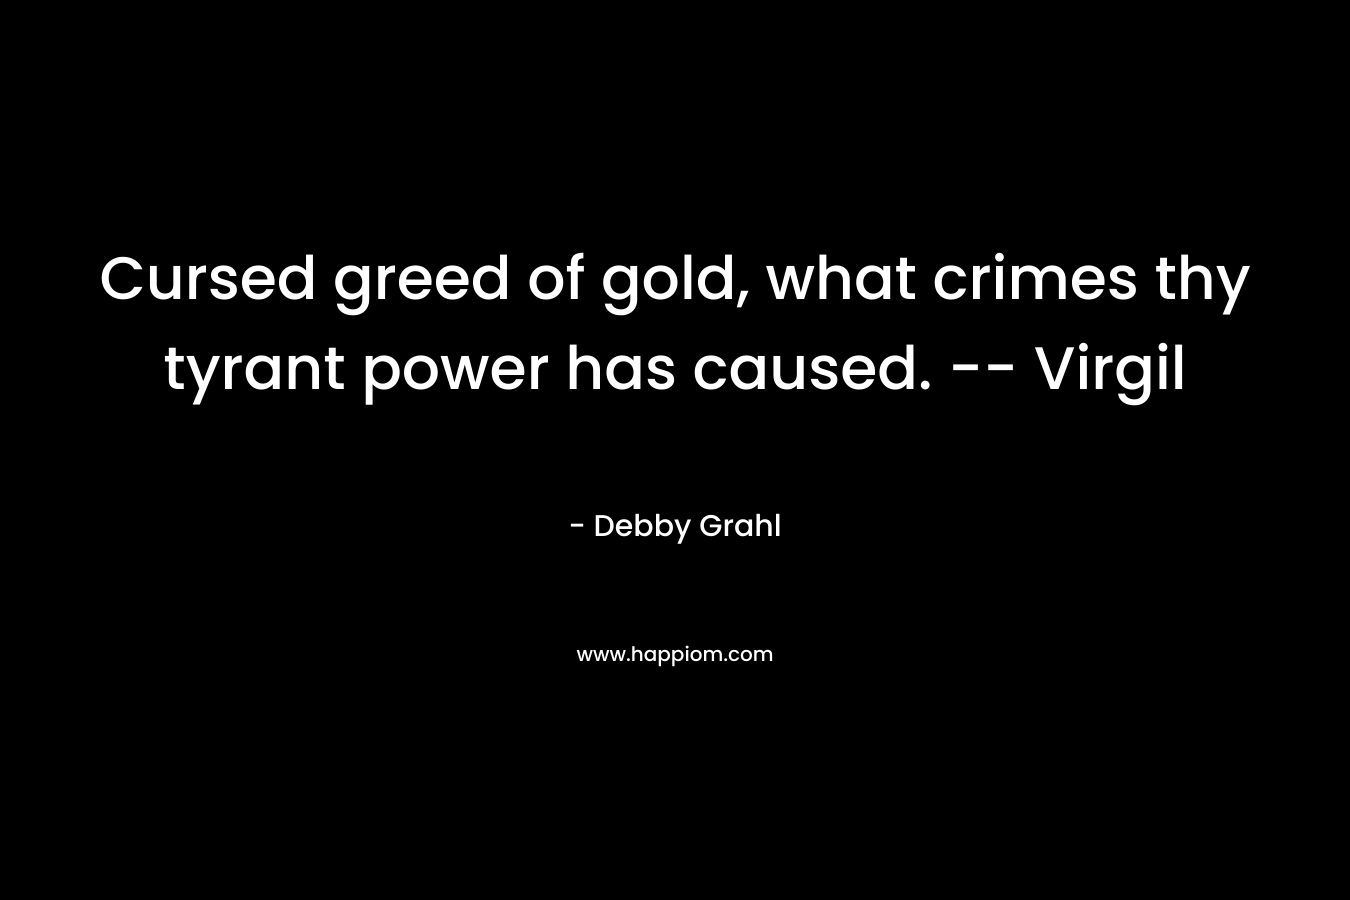 Cursed greed of gold, what crimes thy tyrant power has caused. -- Virgil